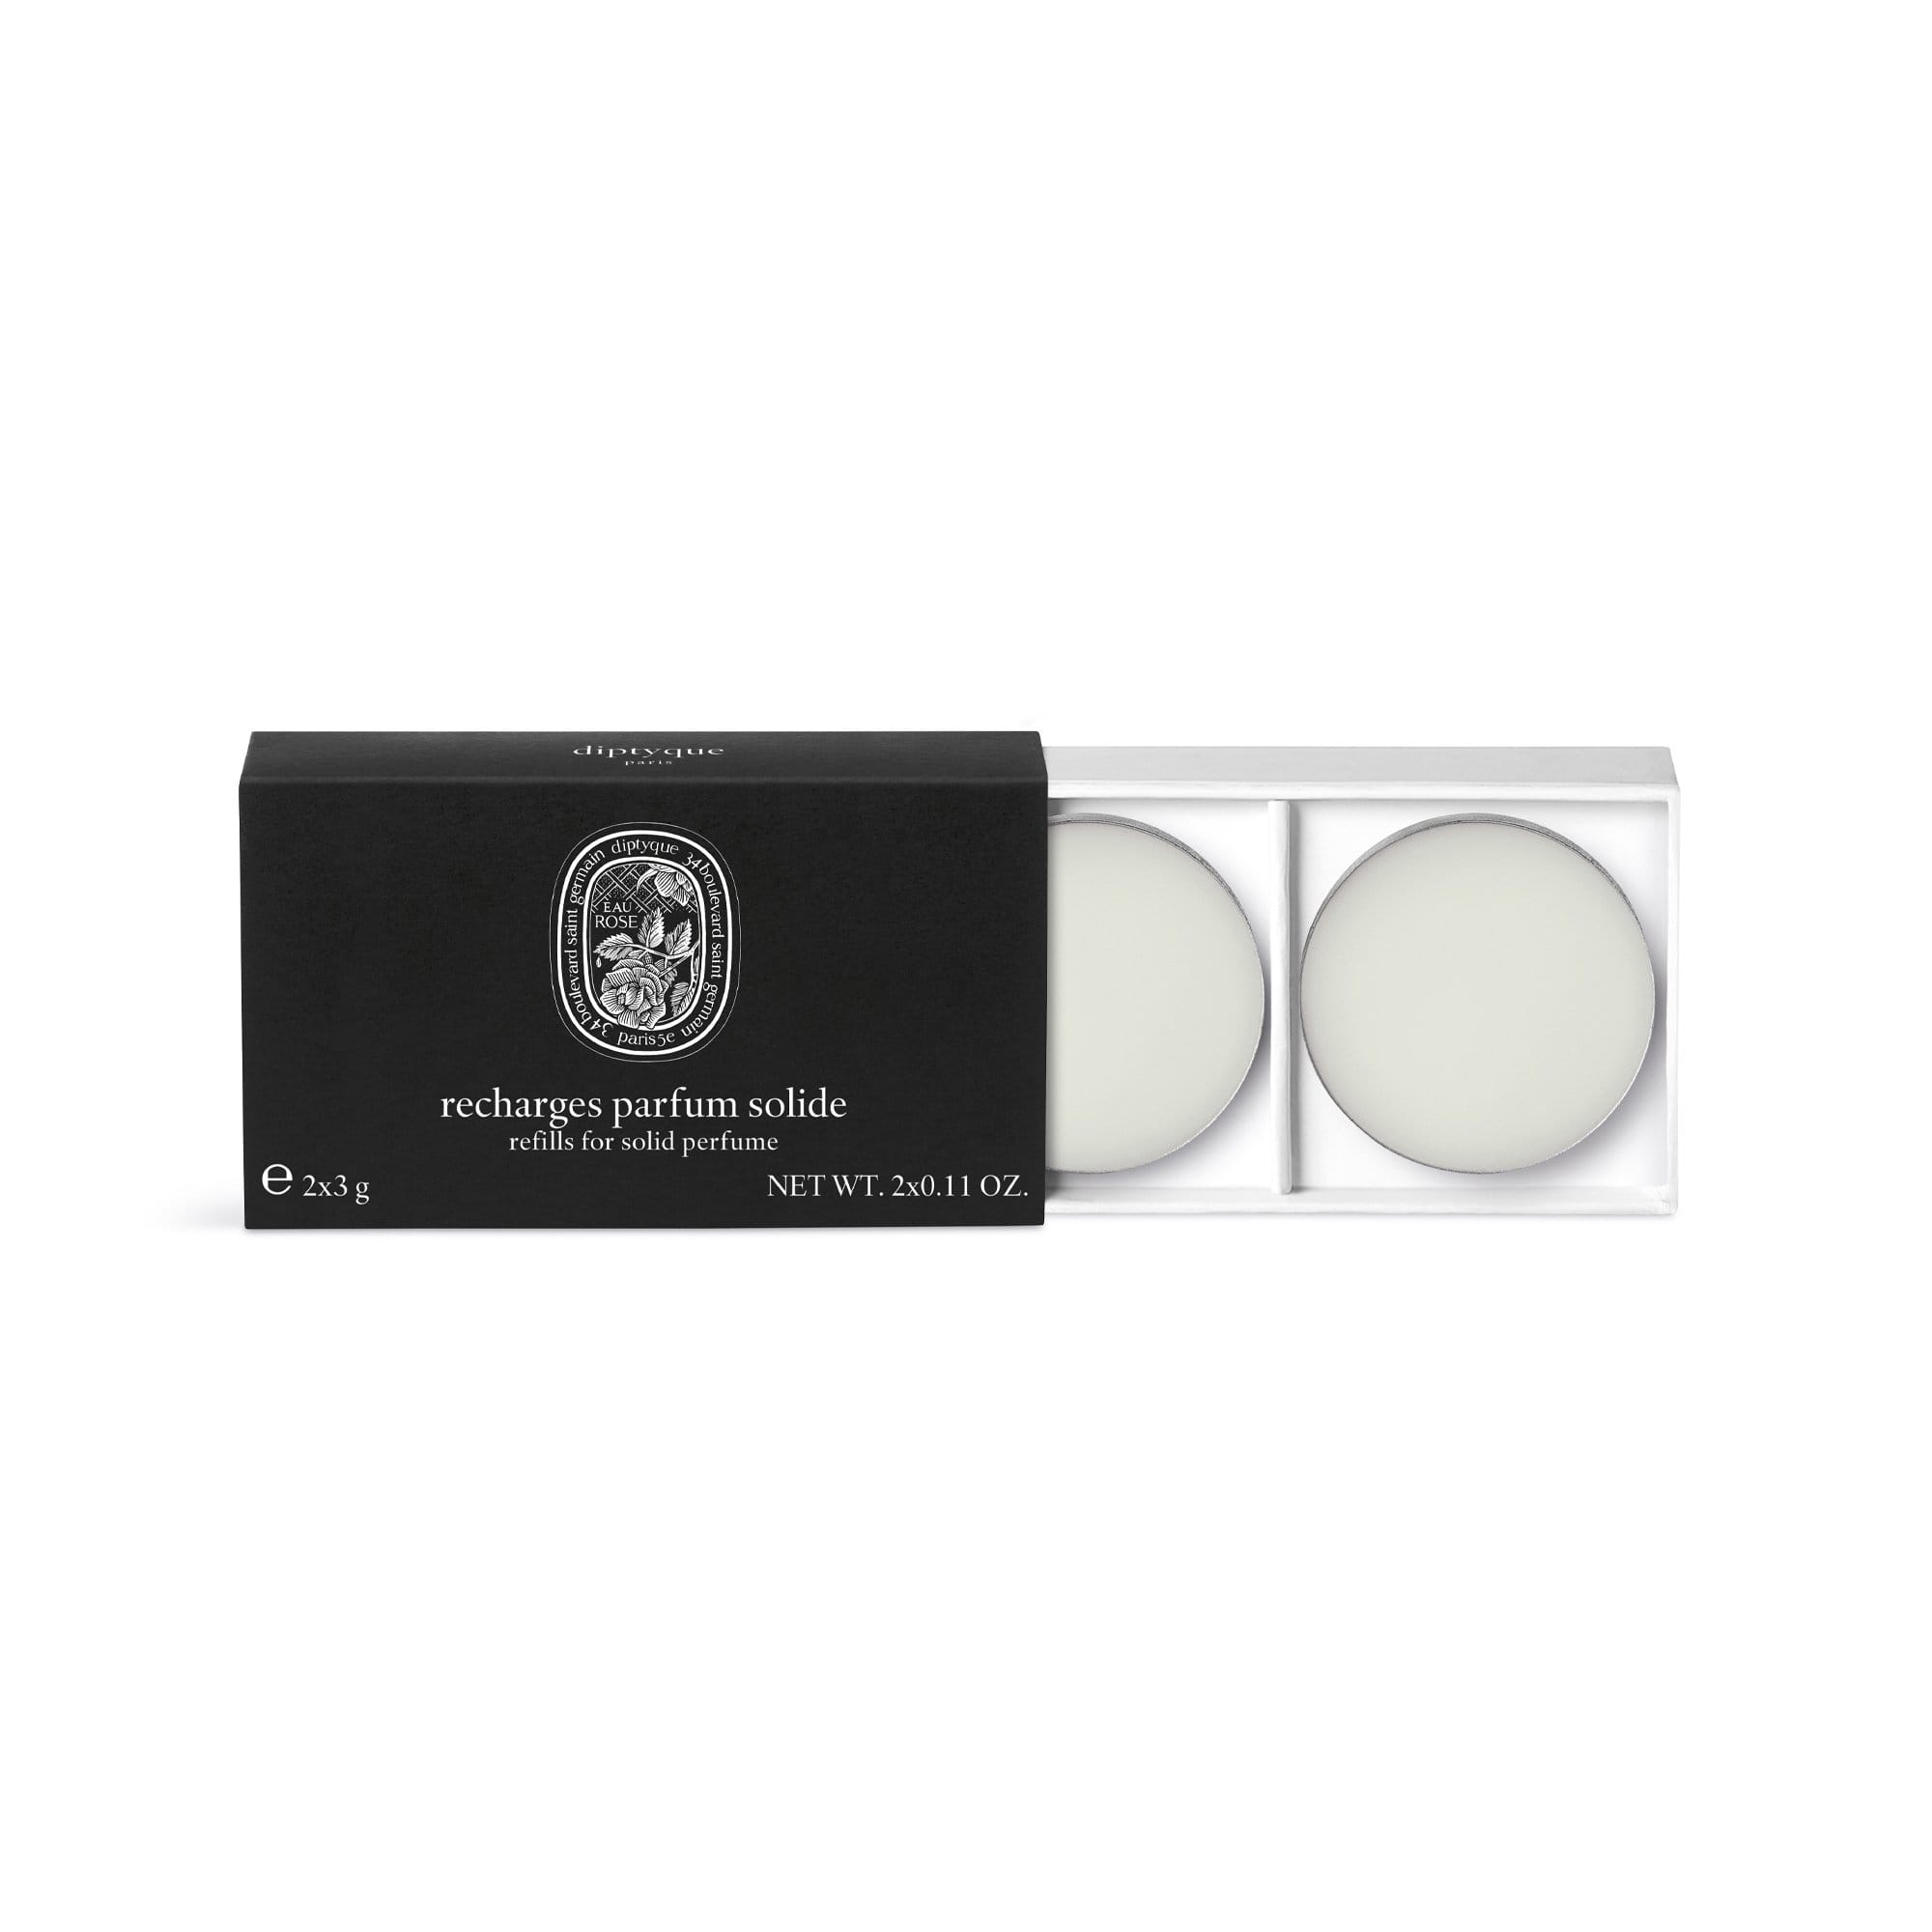 Eau Rose Diptyque solid refillable perfume